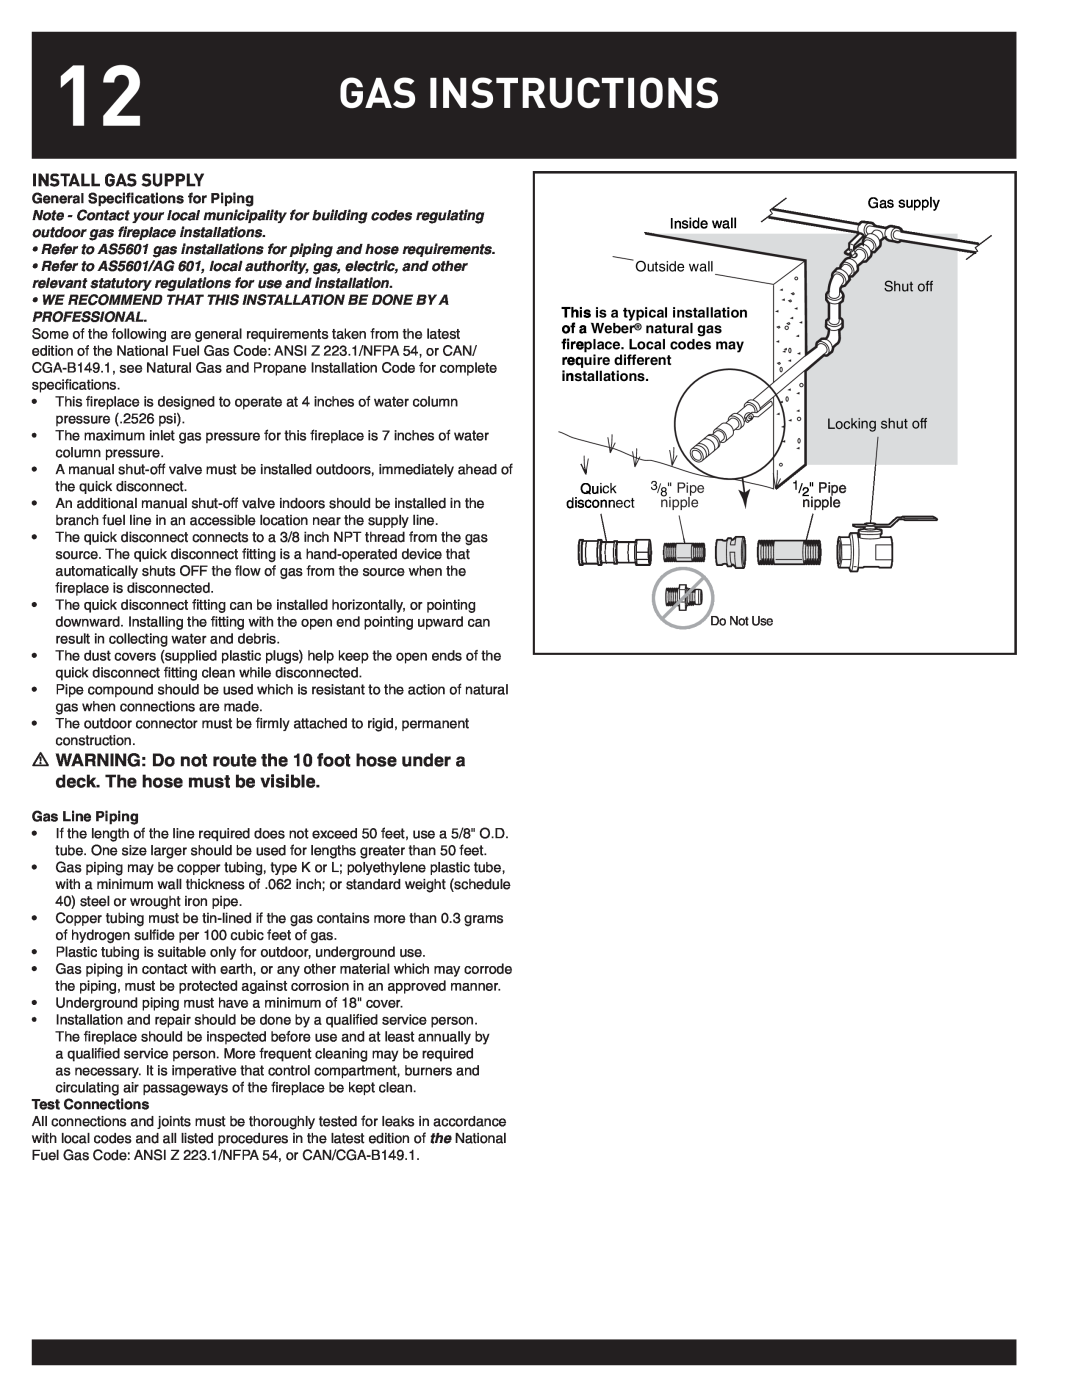 Weber FLAME manual Gas Instructions, Install Gas Supply 